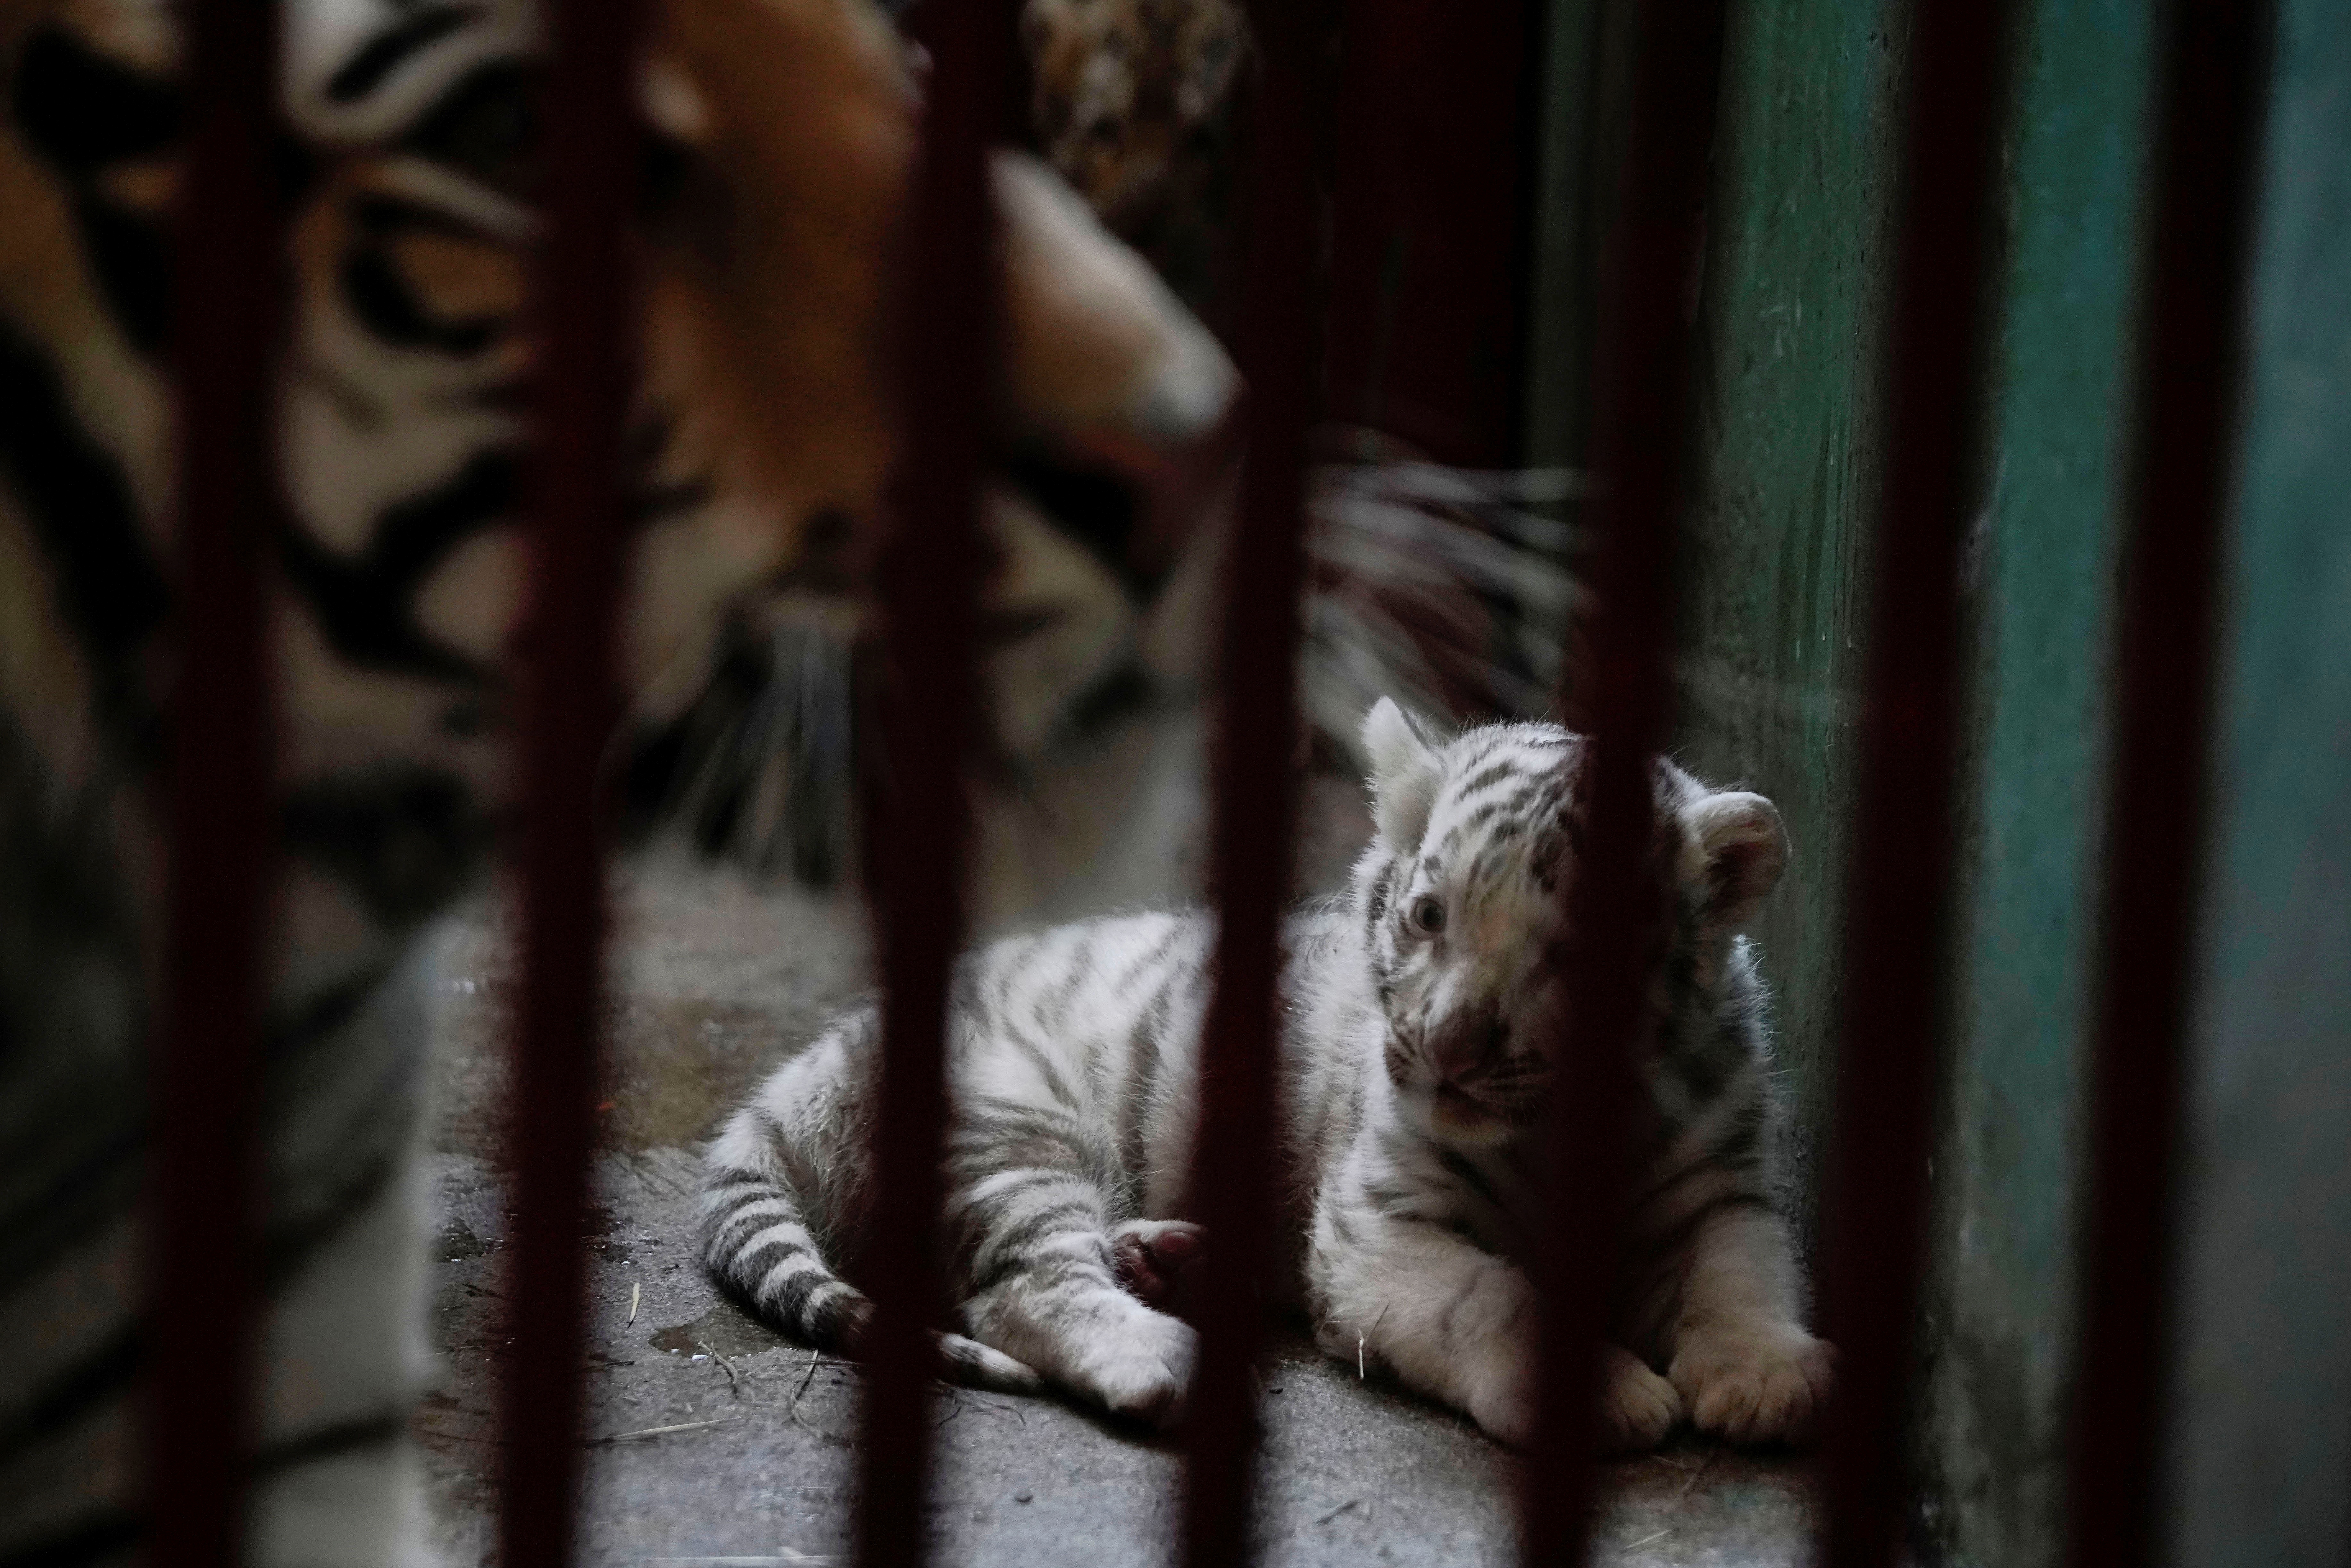 White Bengal Tigers - Key Facts, Information & Pictures